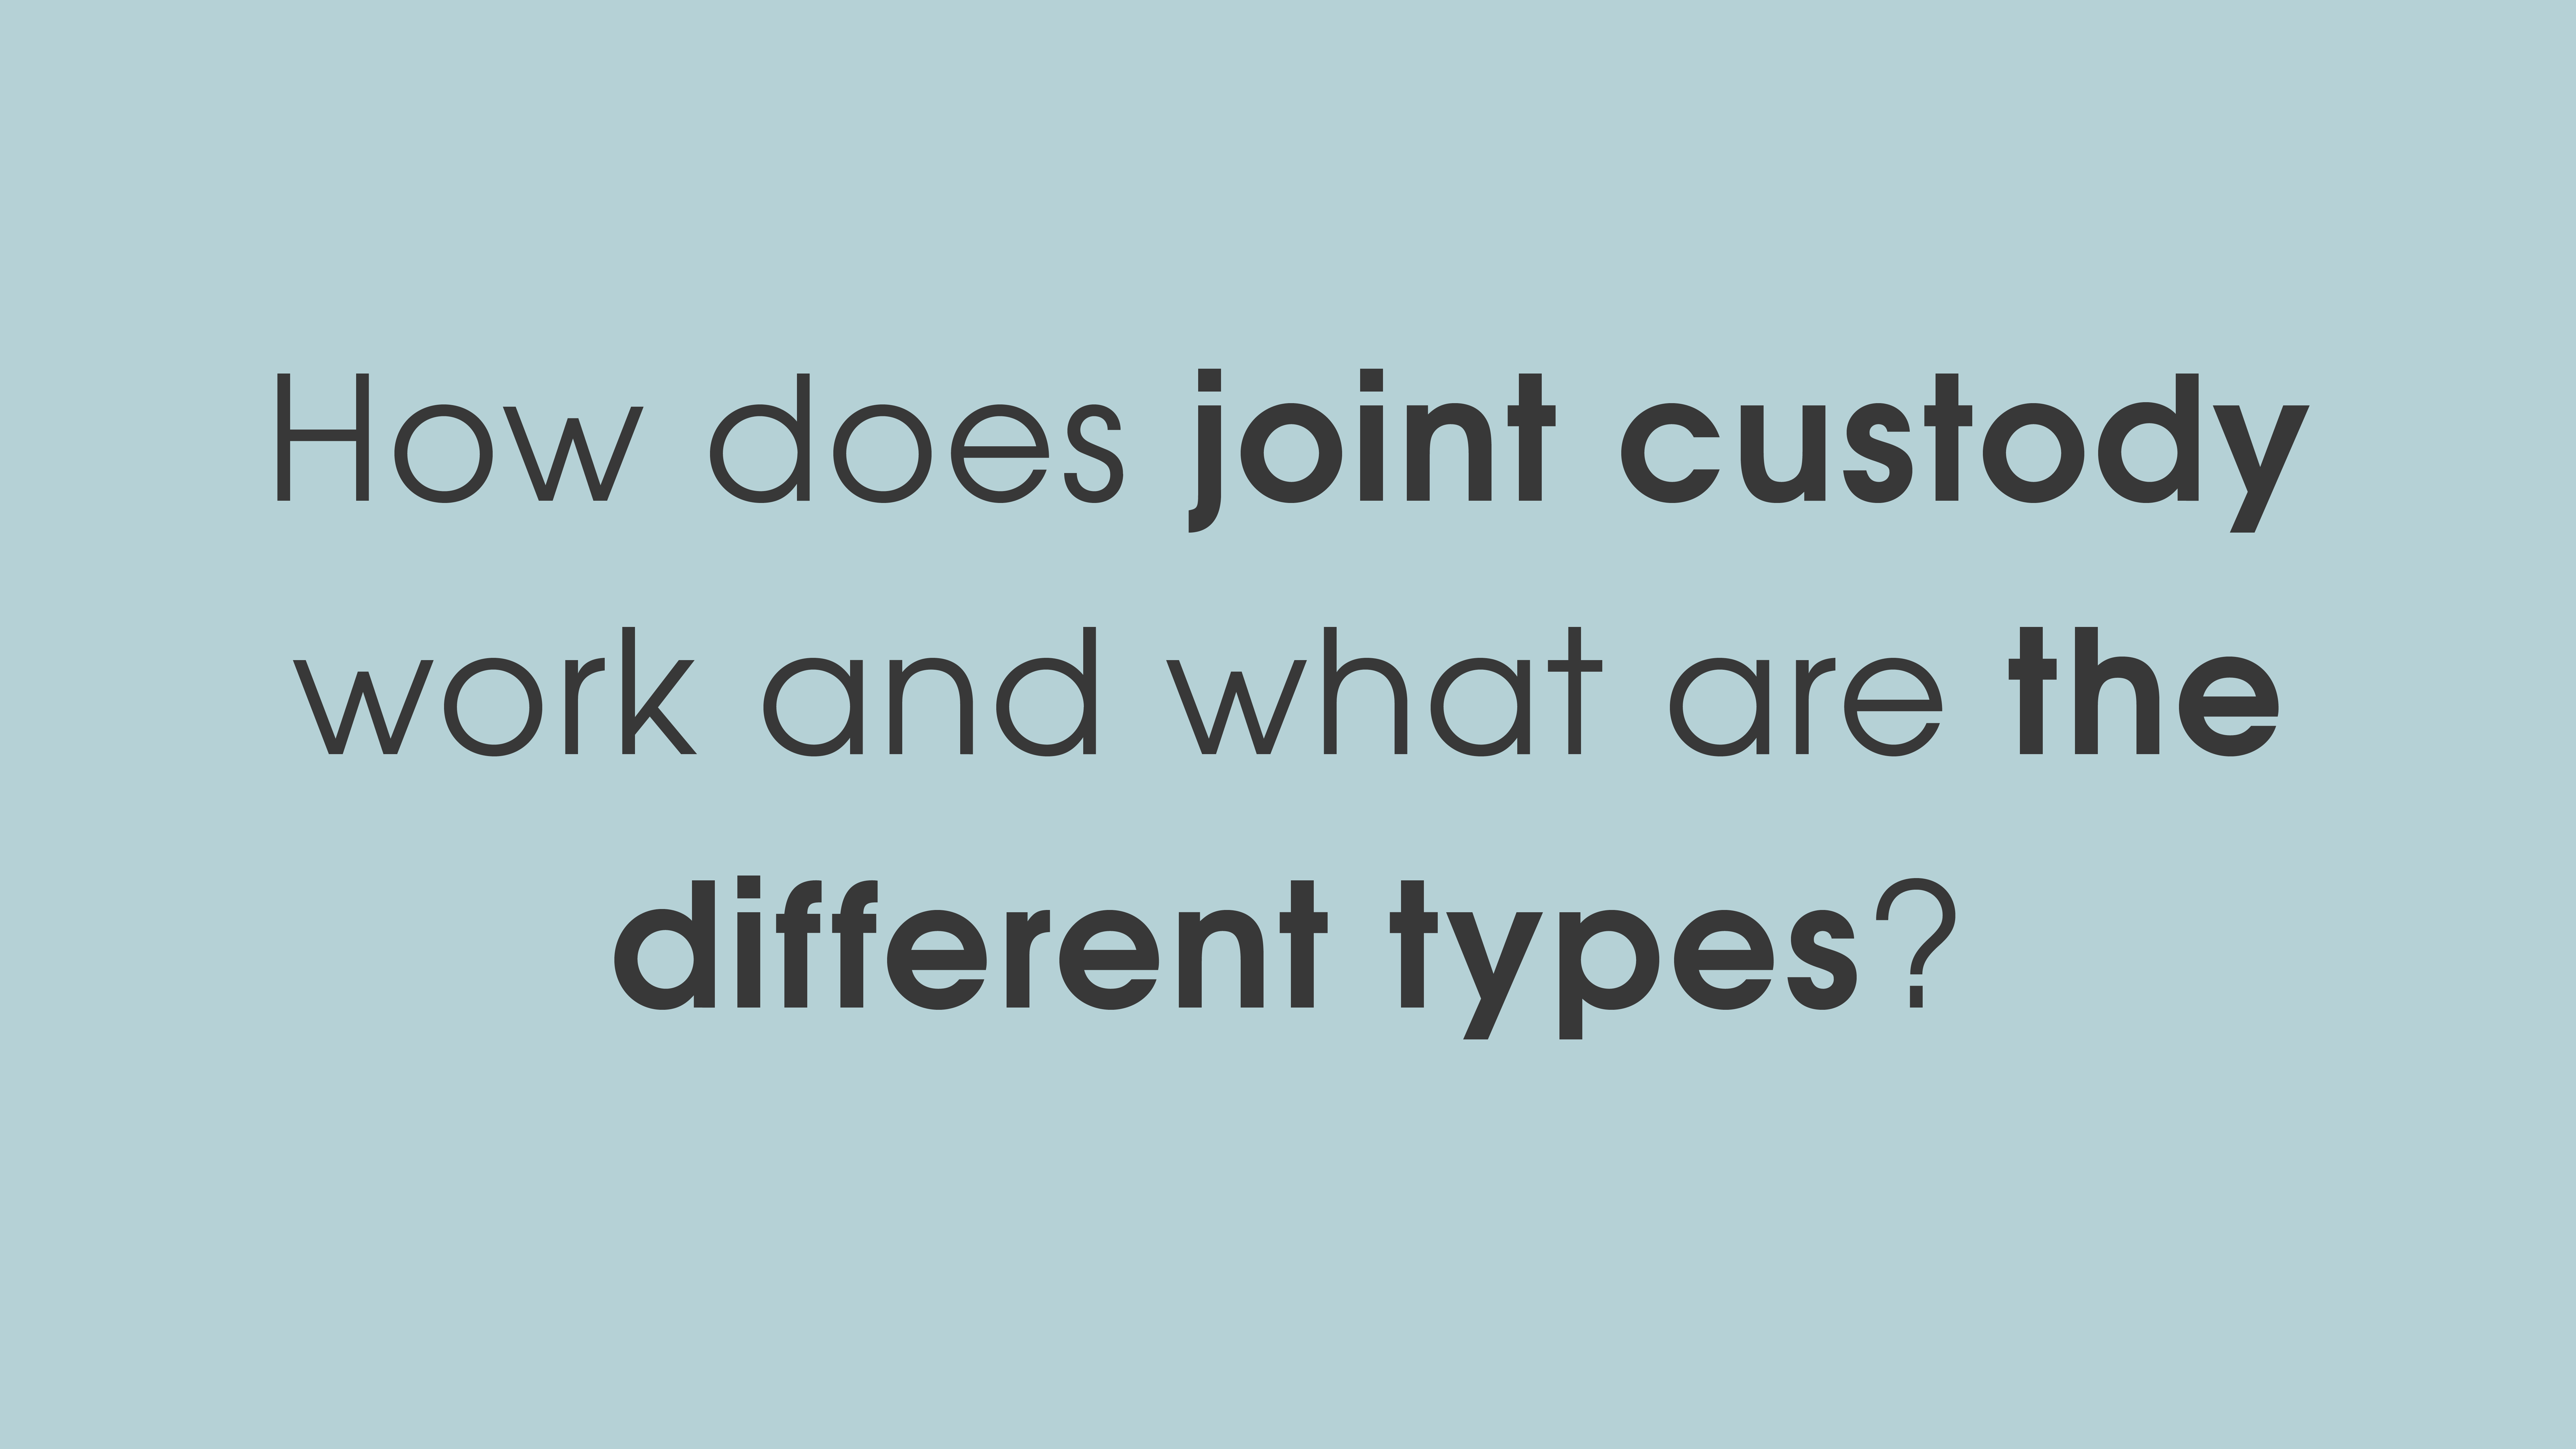 How does joint custody work and what are the different types?